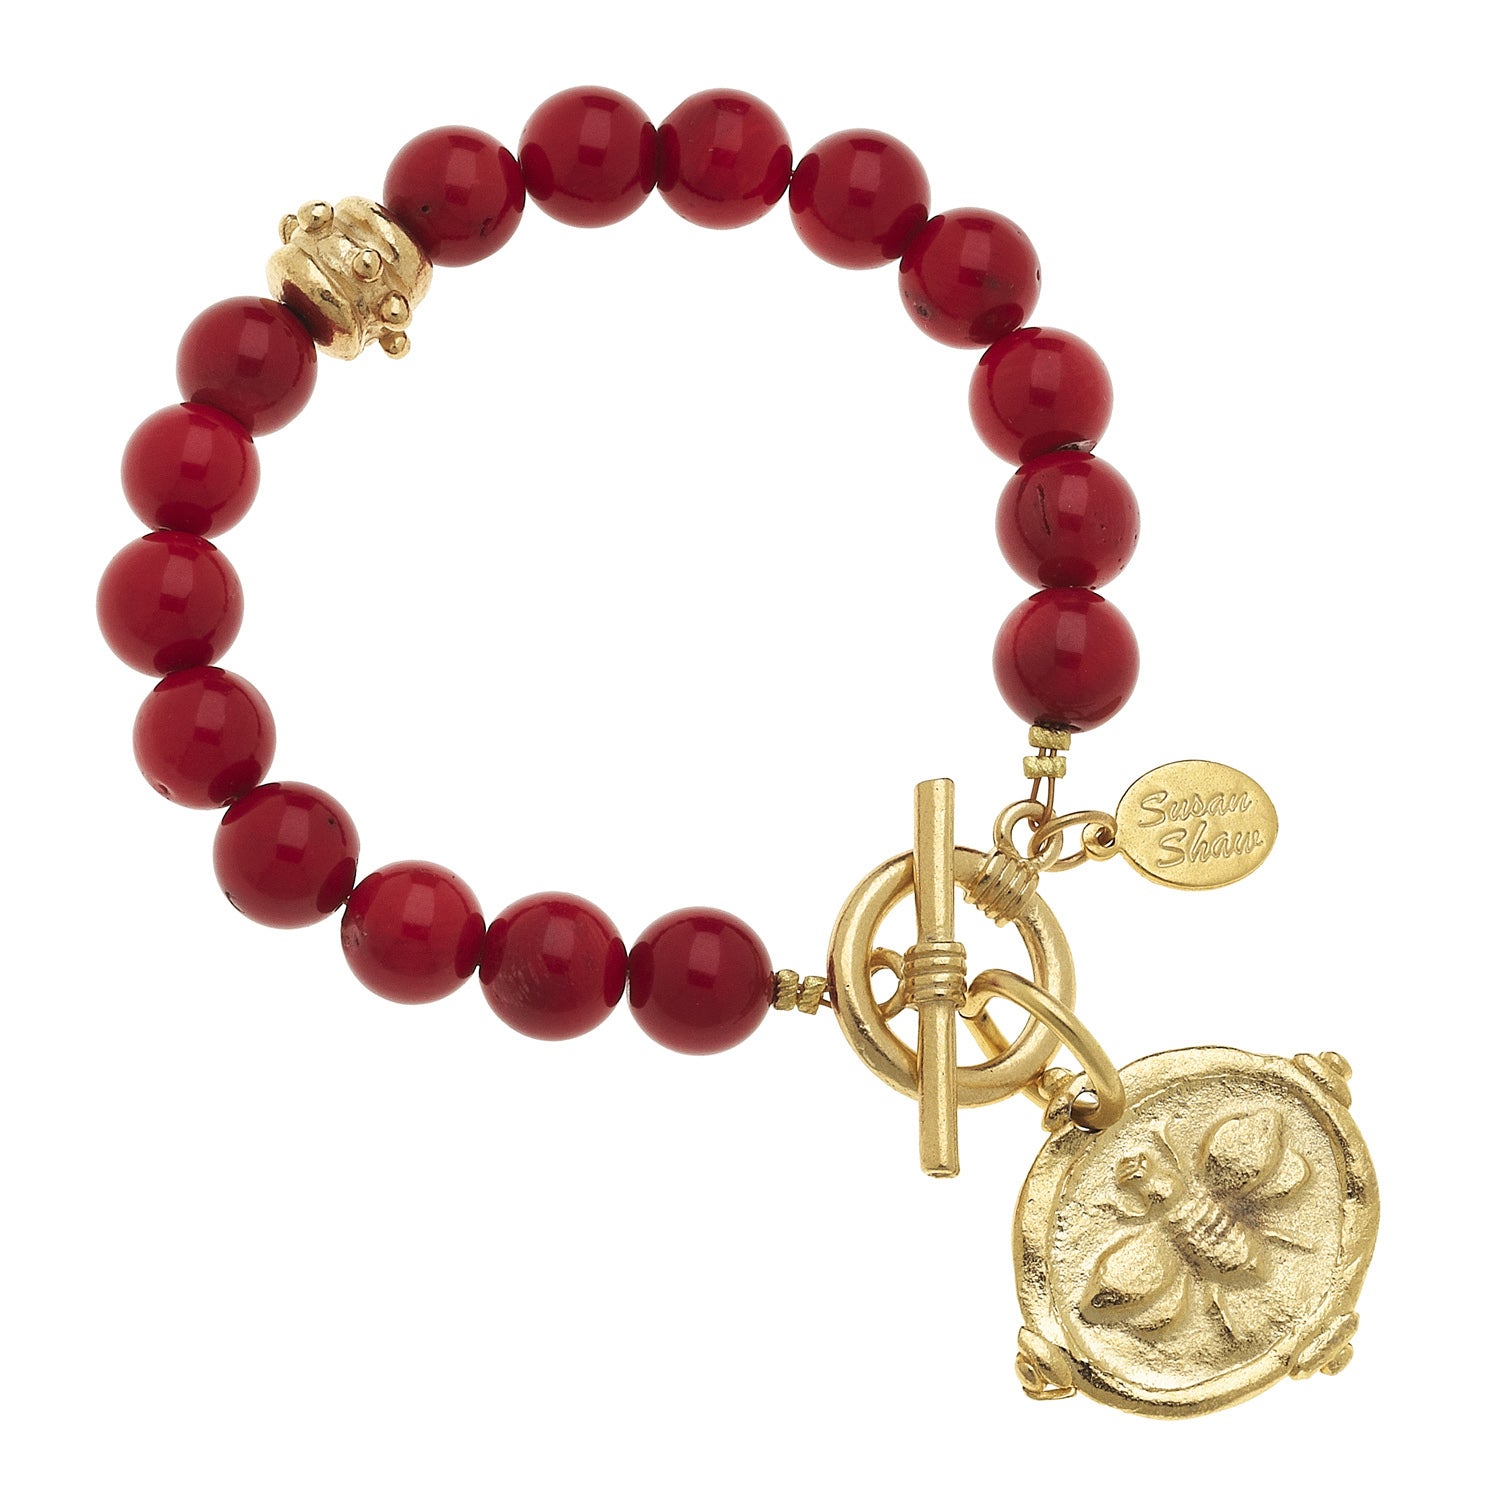 Susan Shaw Red Coral with Italian Intaglio "Bee" Bracelet